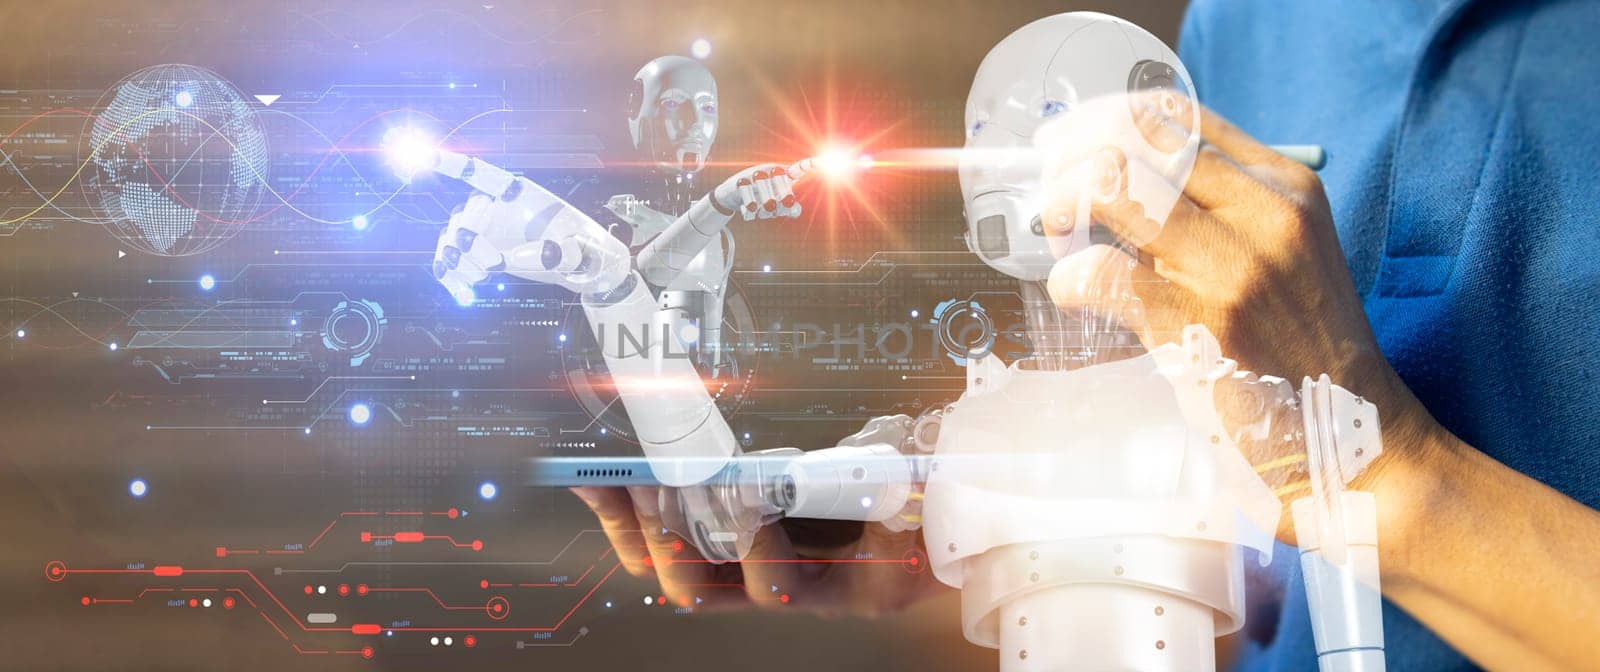 The AI ChatBot concept is unique in that it can interact as naturally as a real human. Industry Innovation 5.0